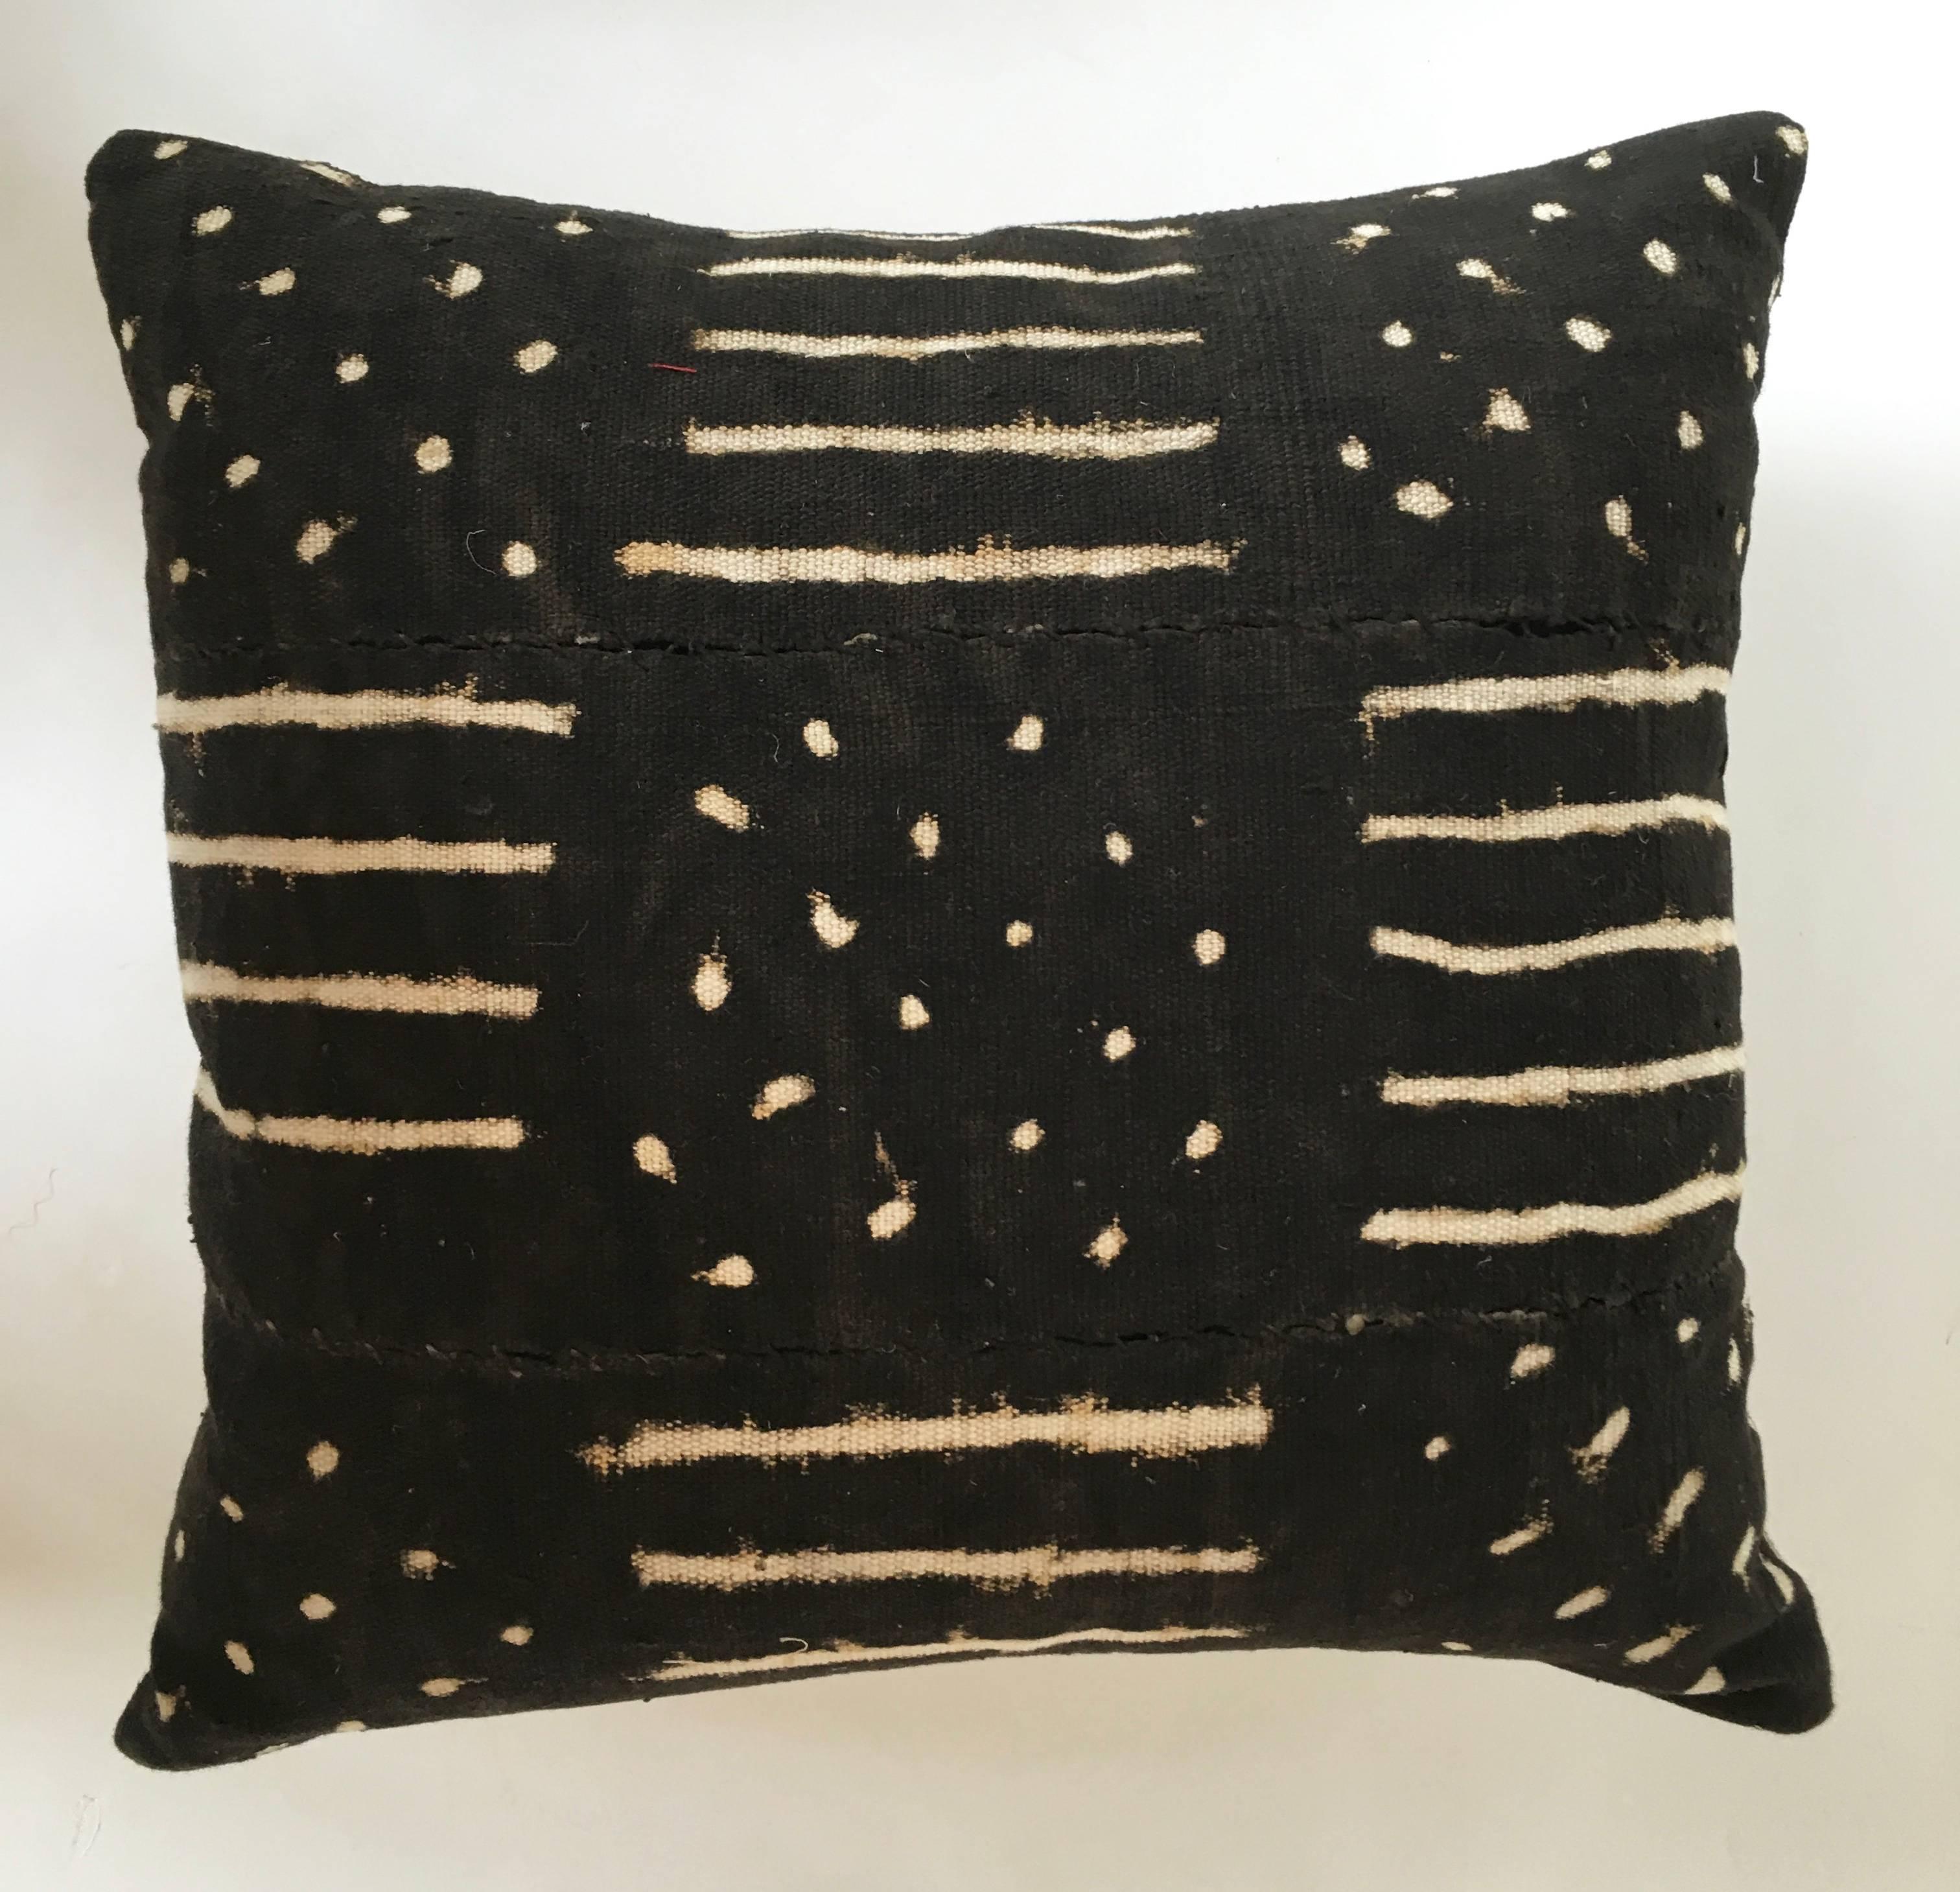 Malian Handmade Black and White Graphic African Mud Cloth Pillows